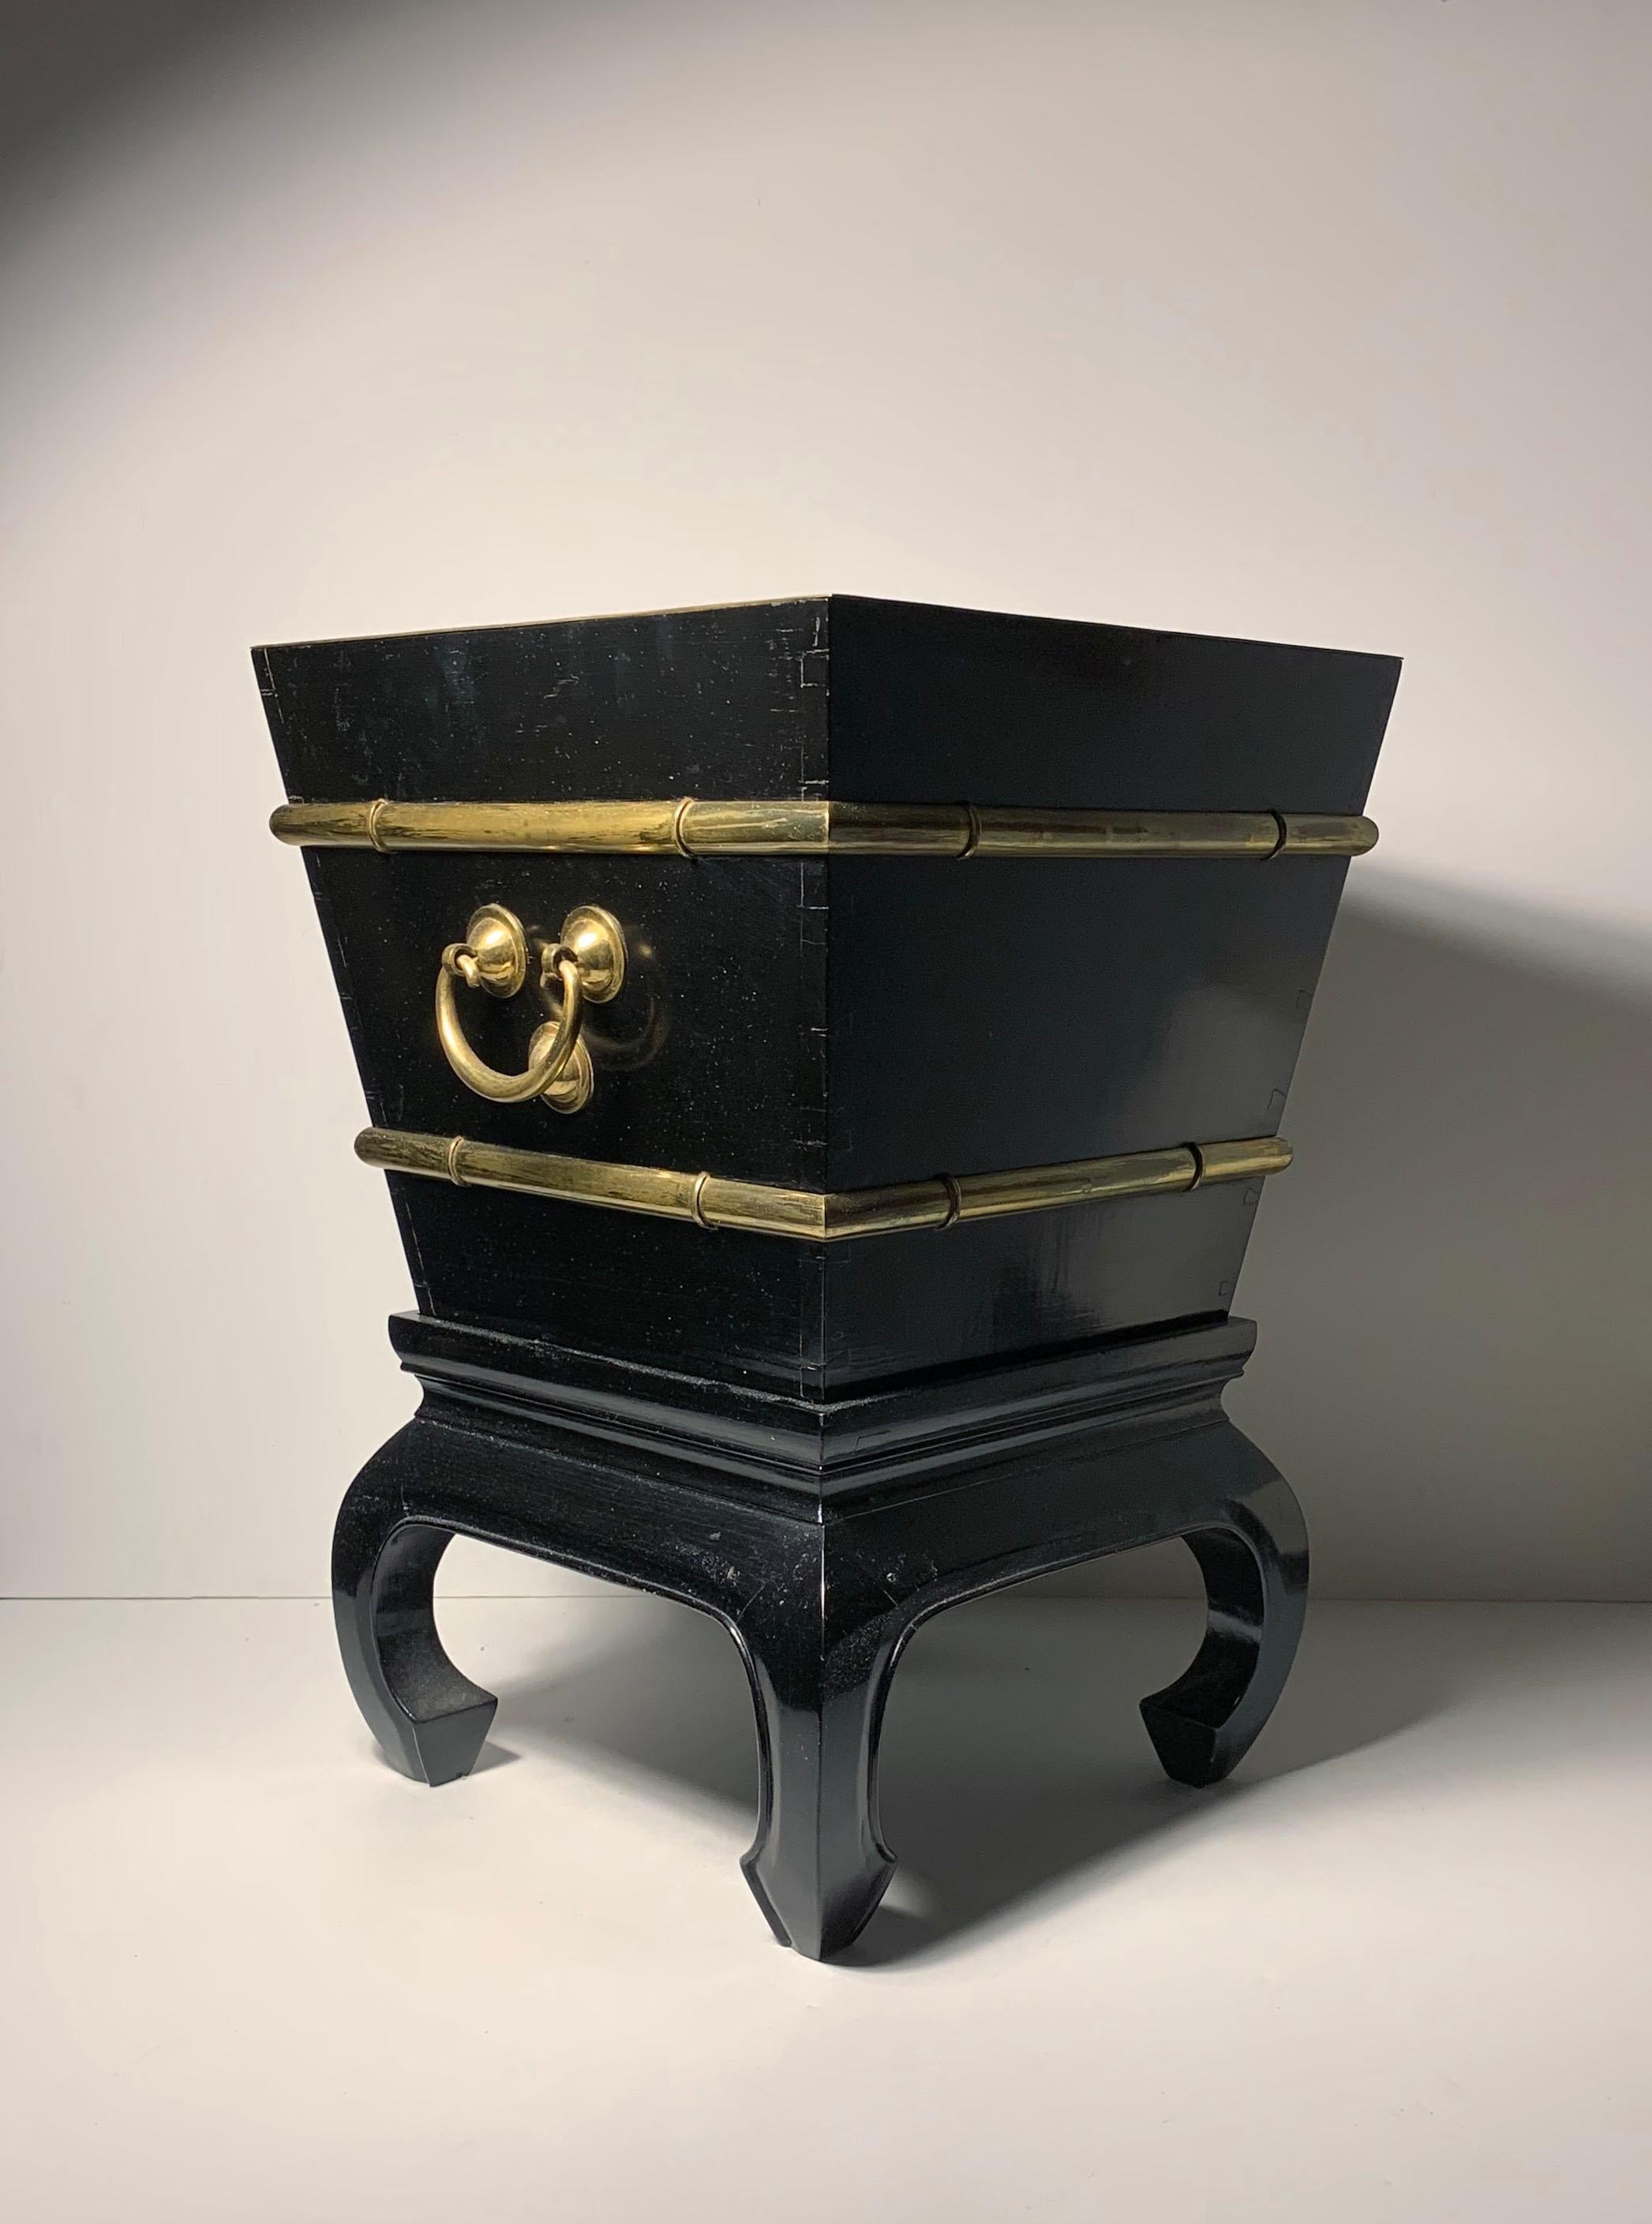 Vintage Hollywood Regency Planter in the Chinoiserie style. 

Style of Mastercraft

Removable aluminum insert

Can also be used as a small side table if adding a top.